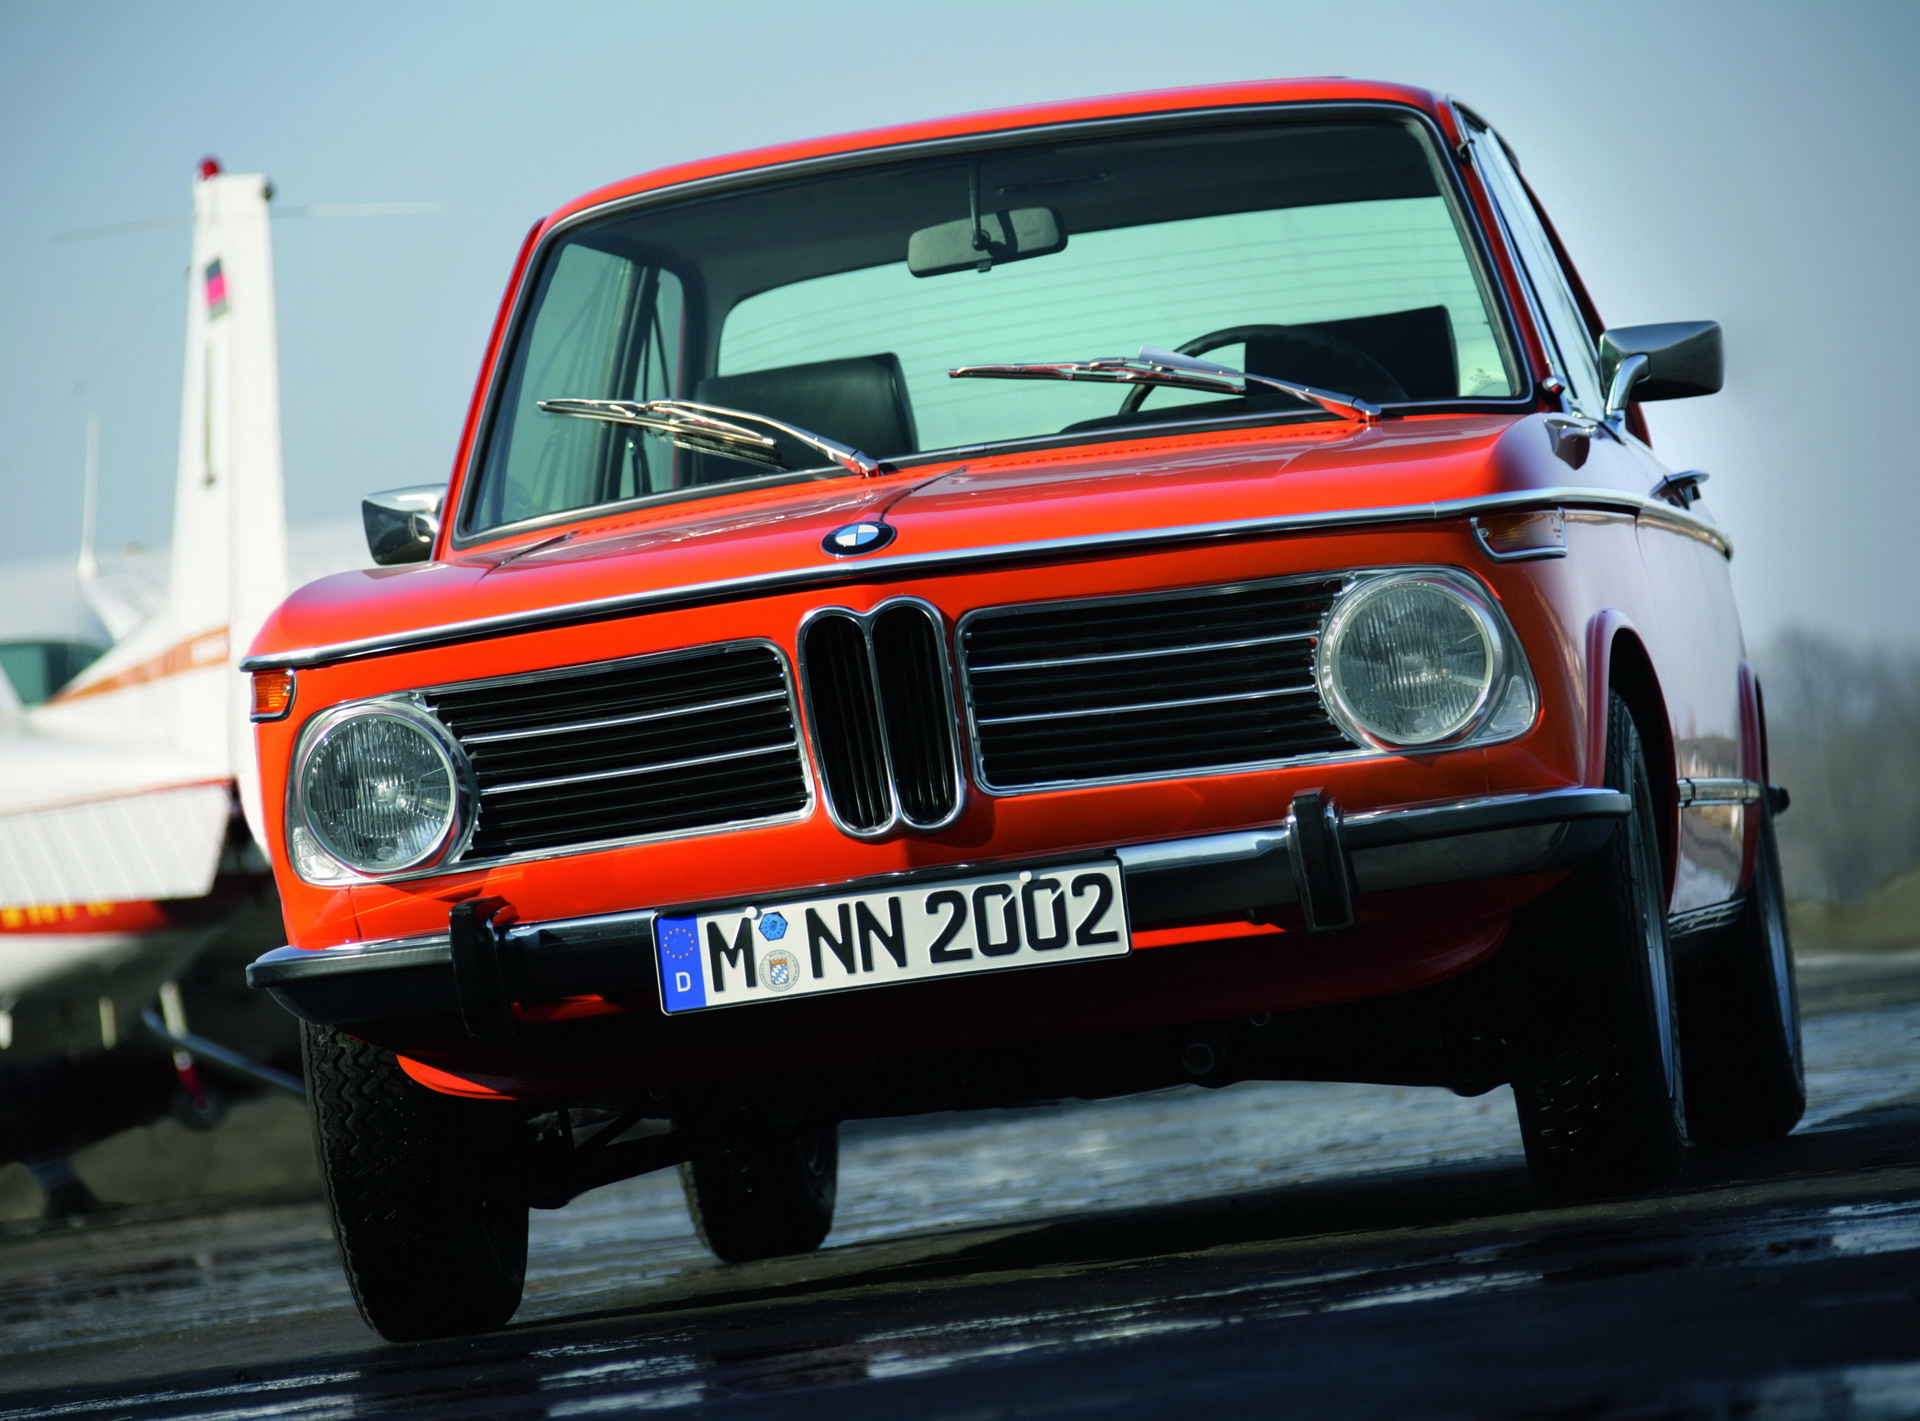 The BMW 2002 14